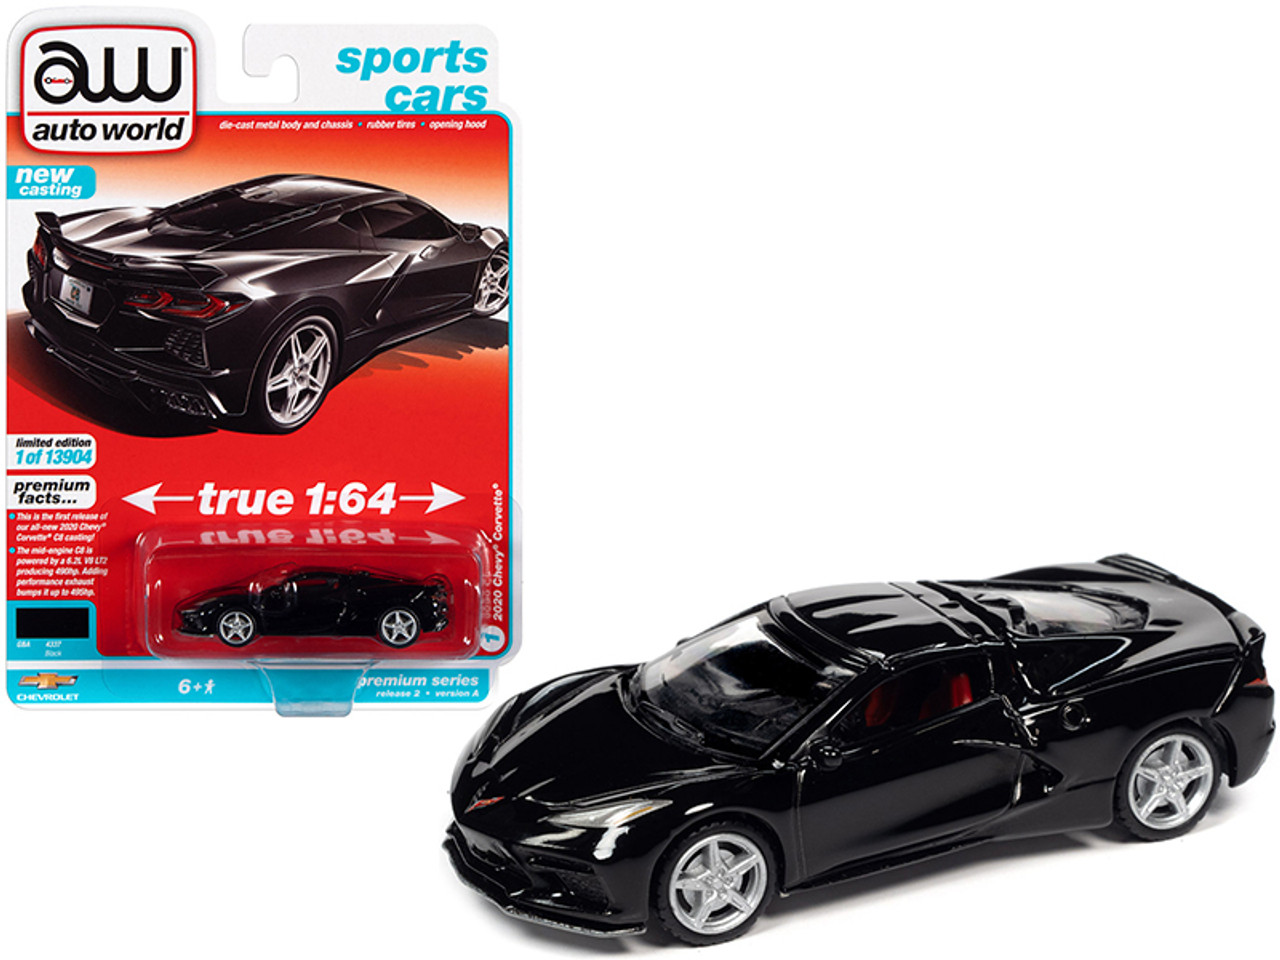 2020 Chevrolet Corvette C8 Stingray Black "Sports Cars" Limited Edition to 13904 pieces Worldwide 1/64 Diecast Model Car by Autoworld